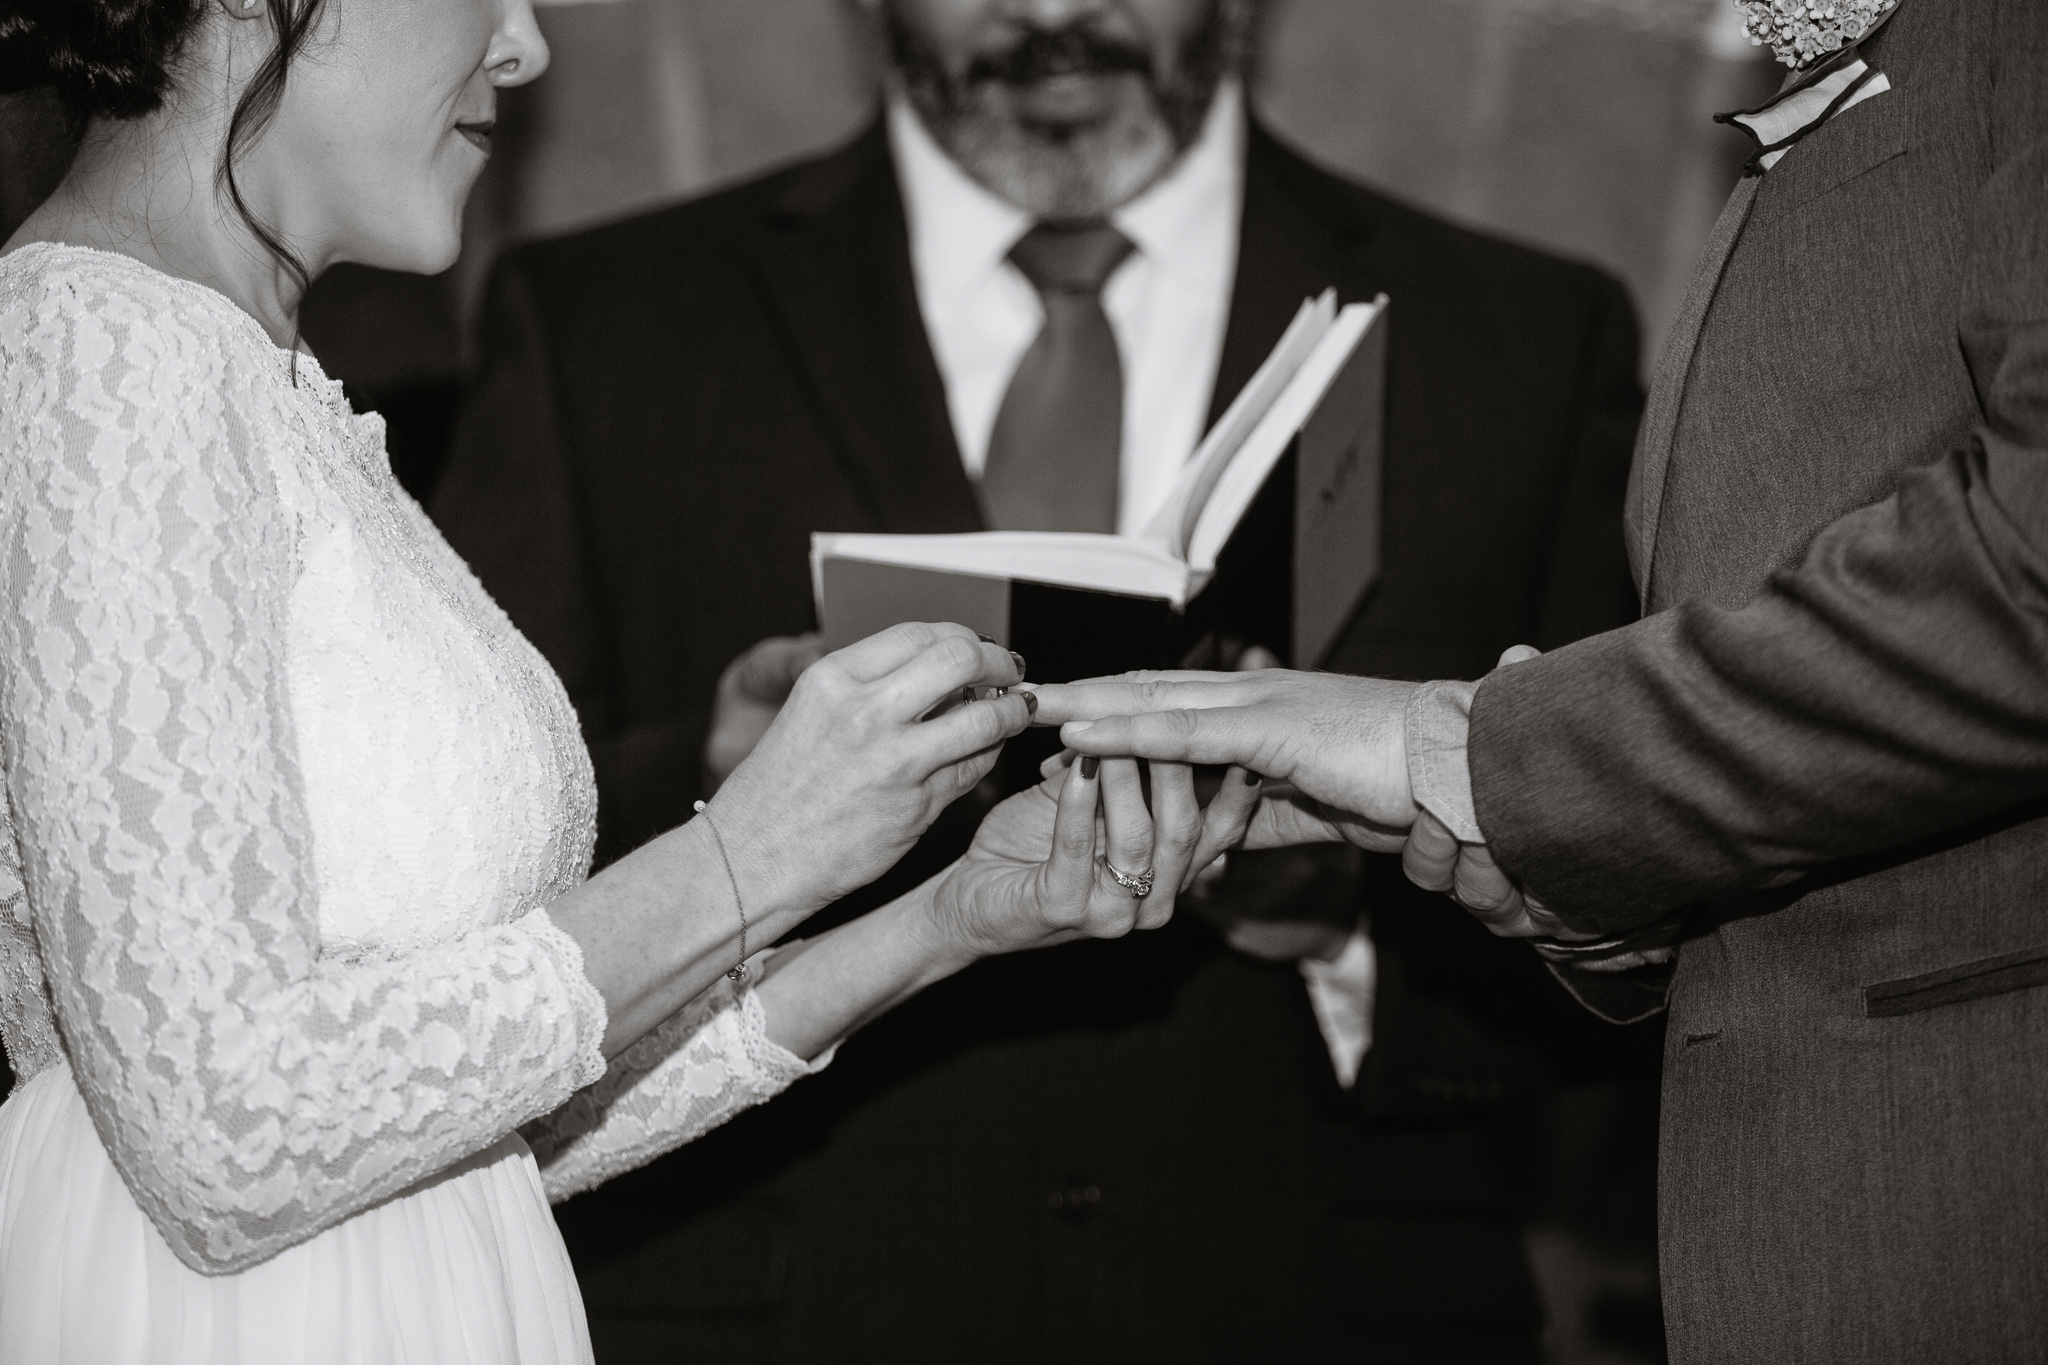 Black and White image of a bride putting a ring on the grooms ring during the wedding ceremony.